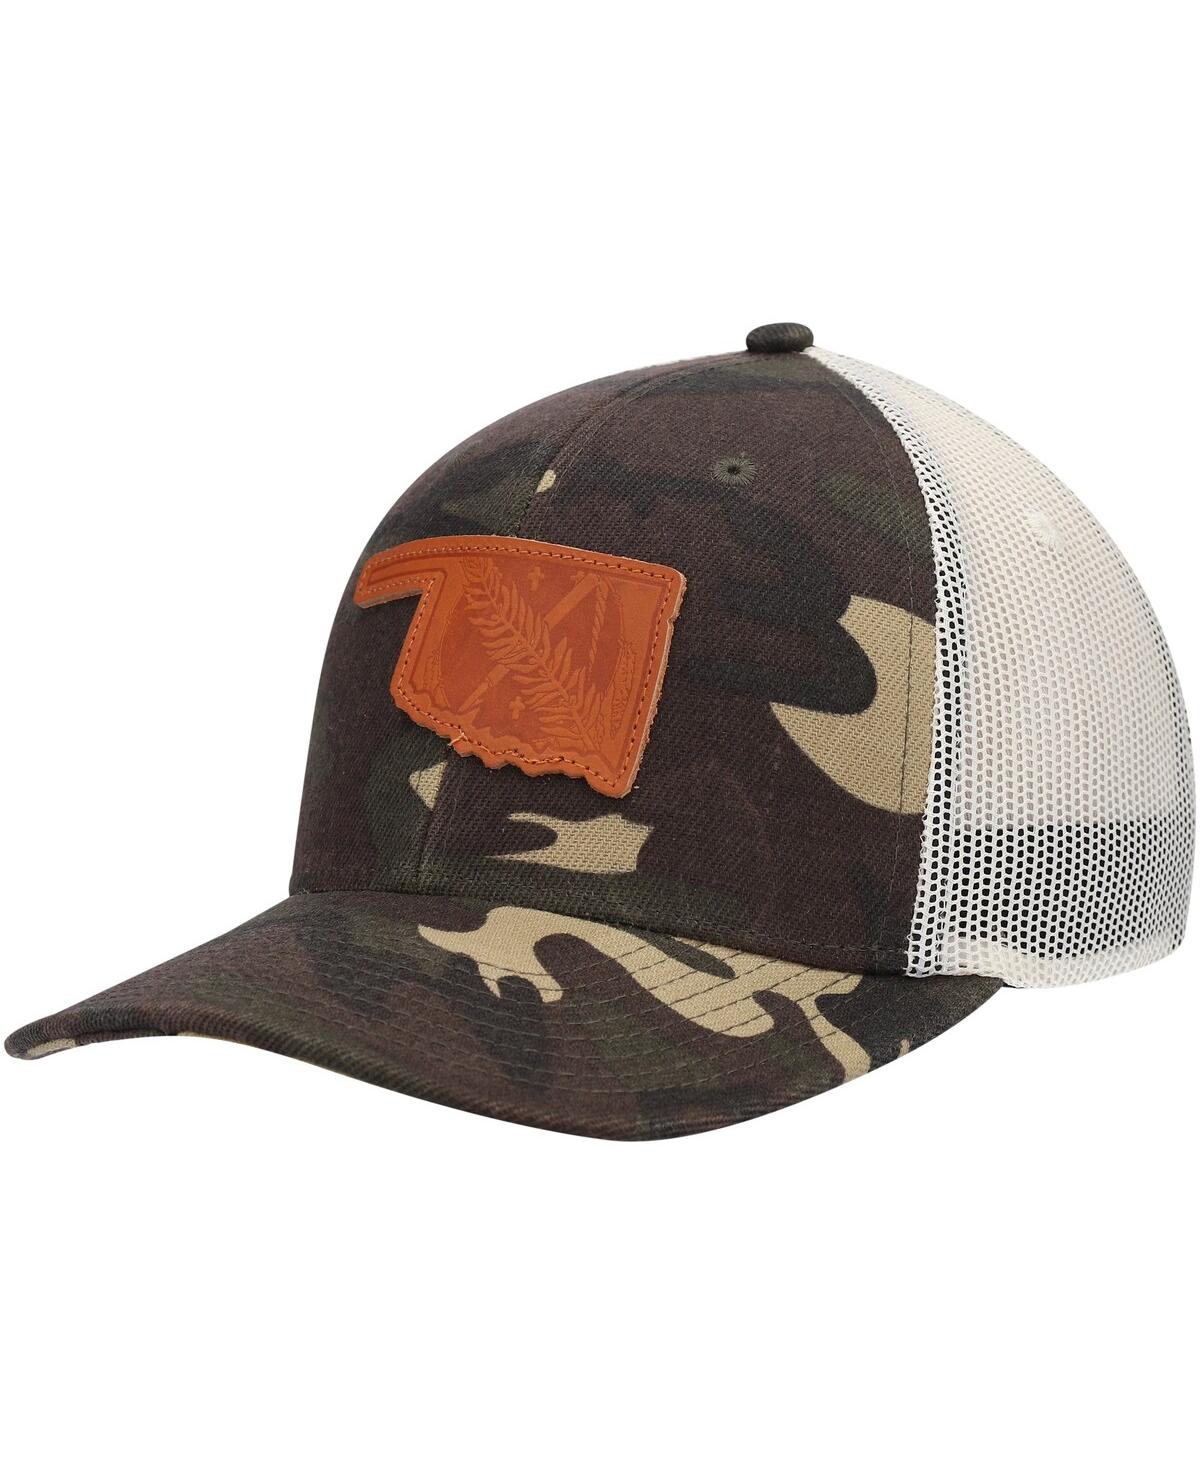 Shop Local Crowns Men's  Camo Oklahoma Icon Woodland State Patch Trucker Snapback Hat